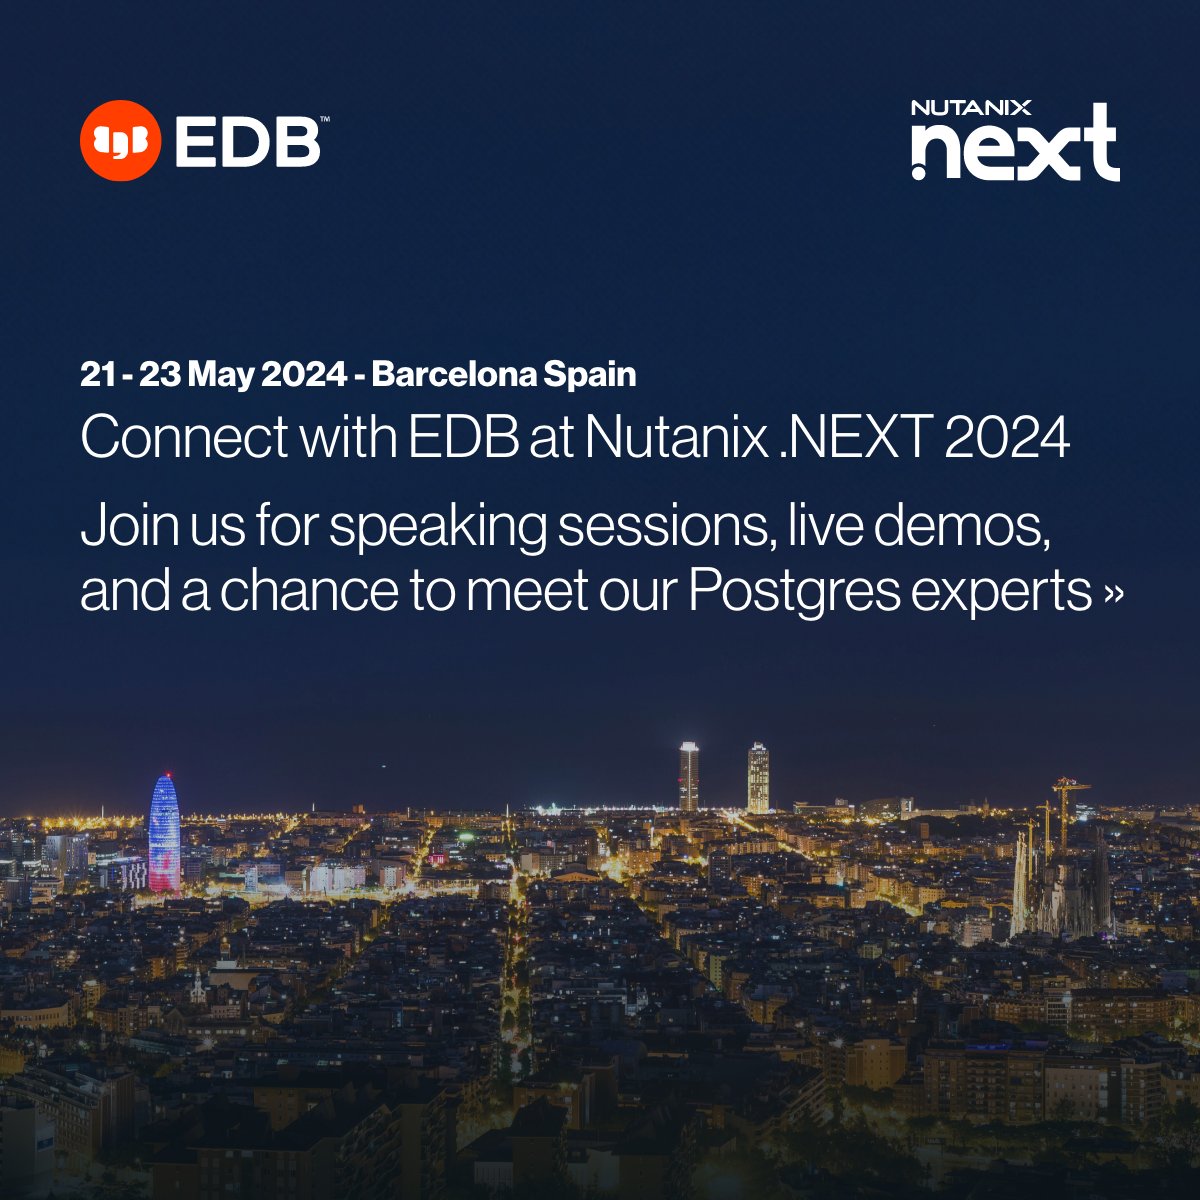 At @EnterpriseDB, we know that #Postgres is the best data platform for enterprises focused on digital transformation. This week at the @nutanix #NEXTConf we're sharing knowledge and insights on how Postgres can support the workloads of the future. bit.ly/3UJ4Lzz